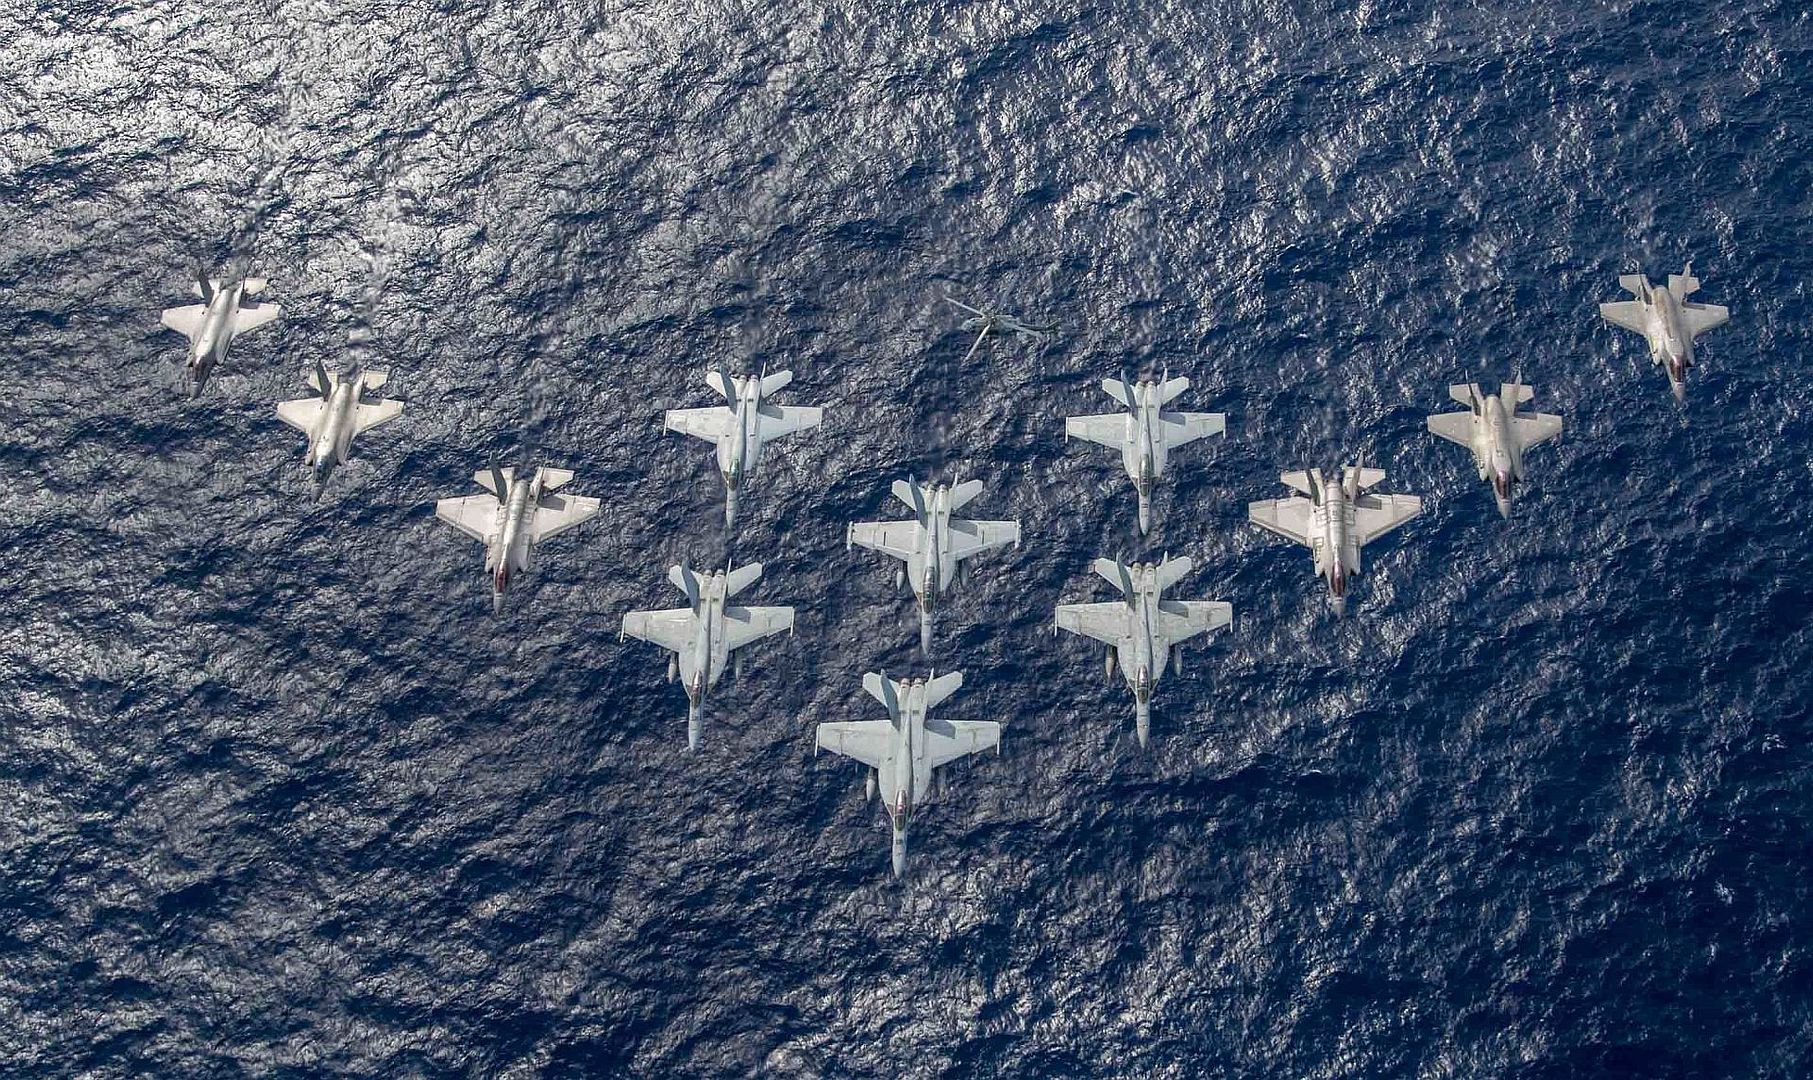 Aircraft From The United Kingdom S Carrier Strike Group Led By HMS Queen Elizabeth